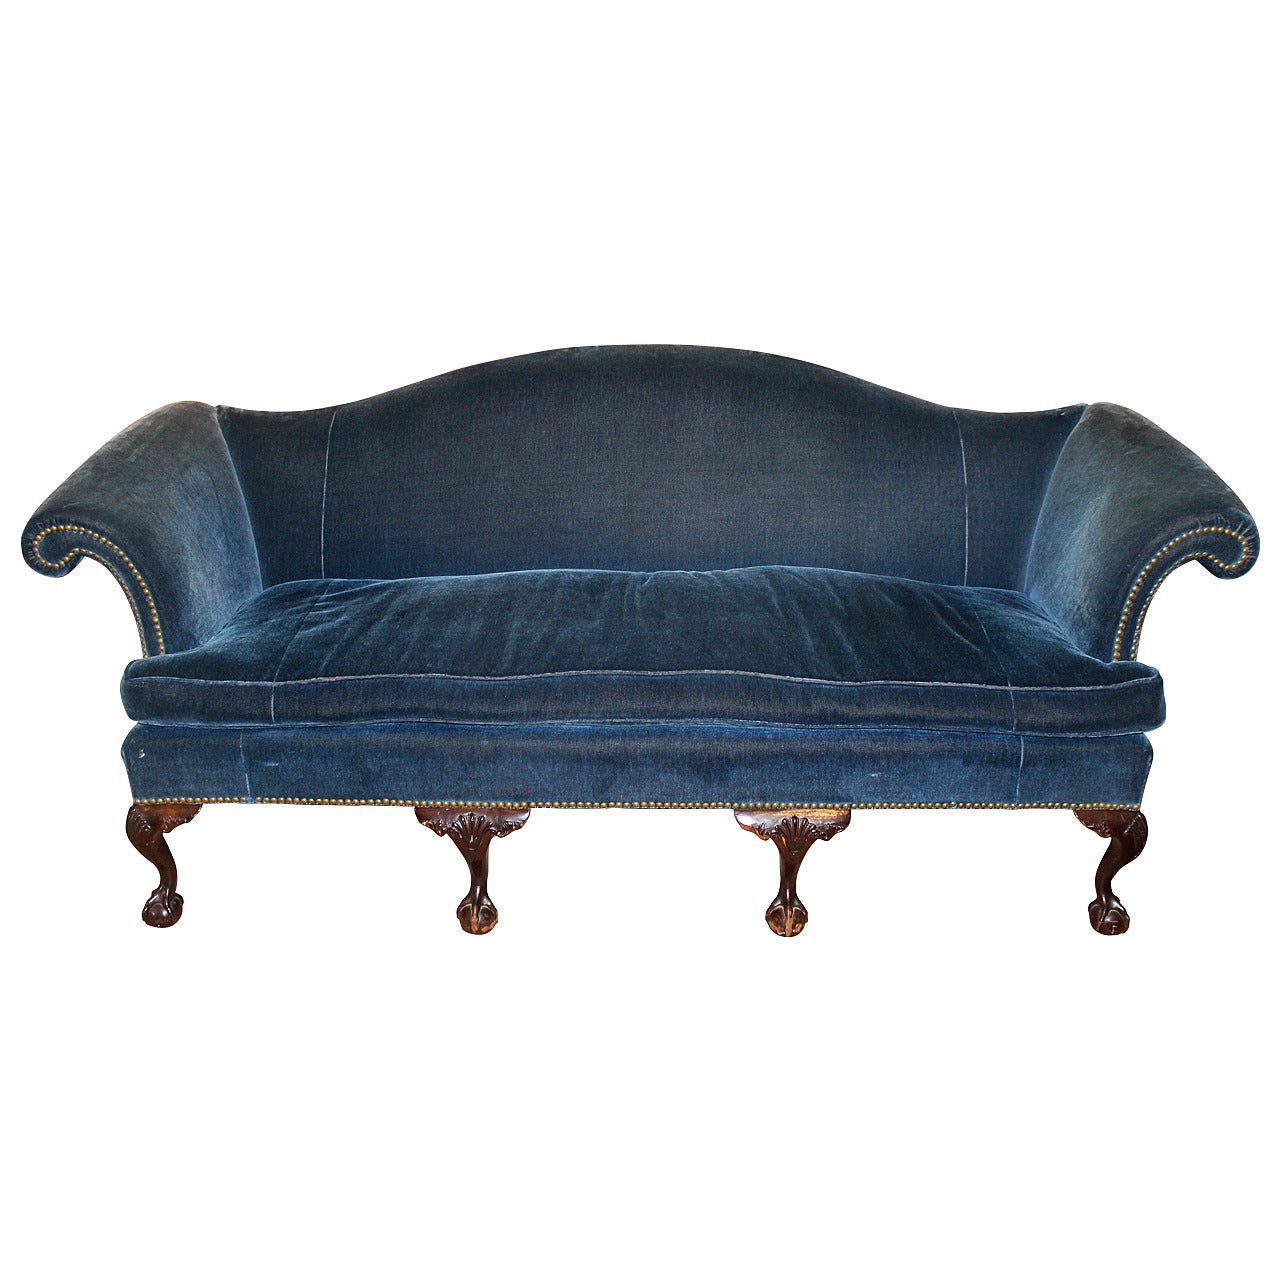 Chippendale Style Camelback Centennial Sofa with ball and claw feet